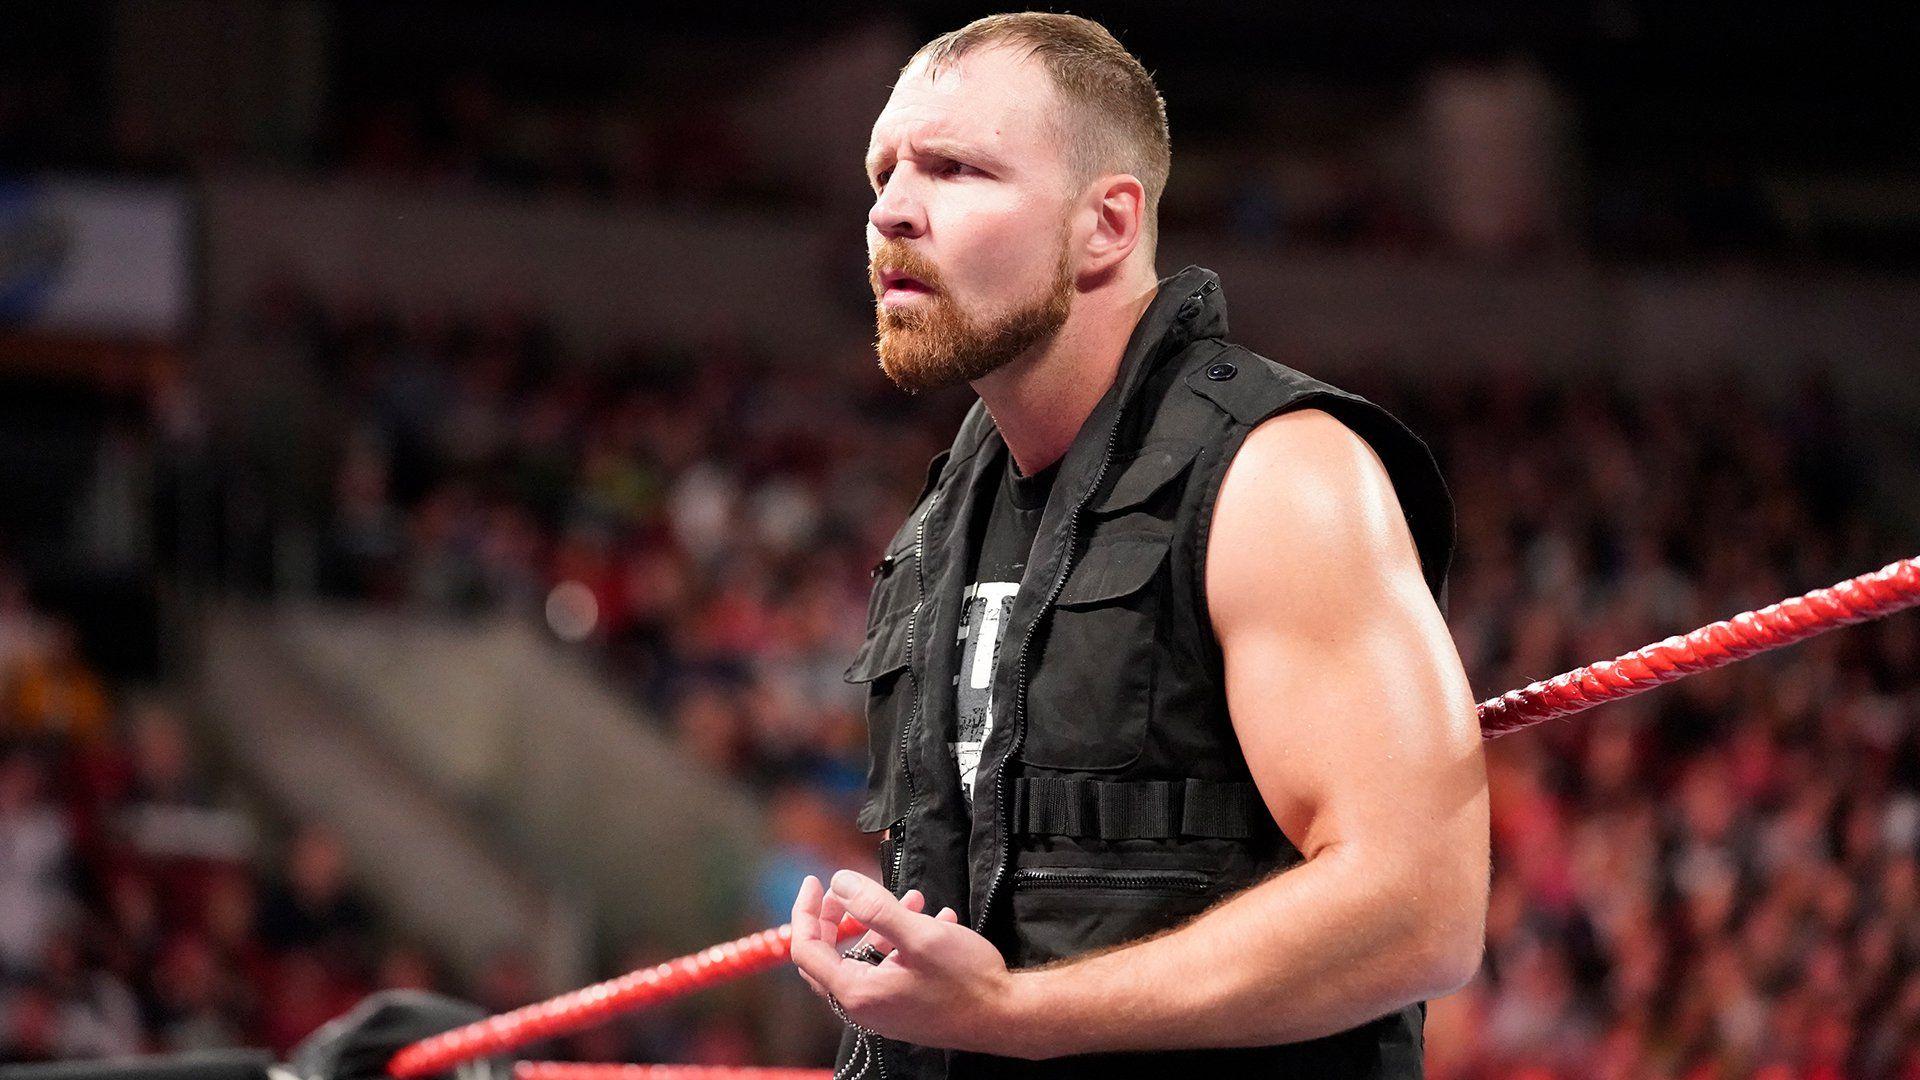 Dean Ambrose's Shield loyalty comes into question: Raw, Oct. 2018